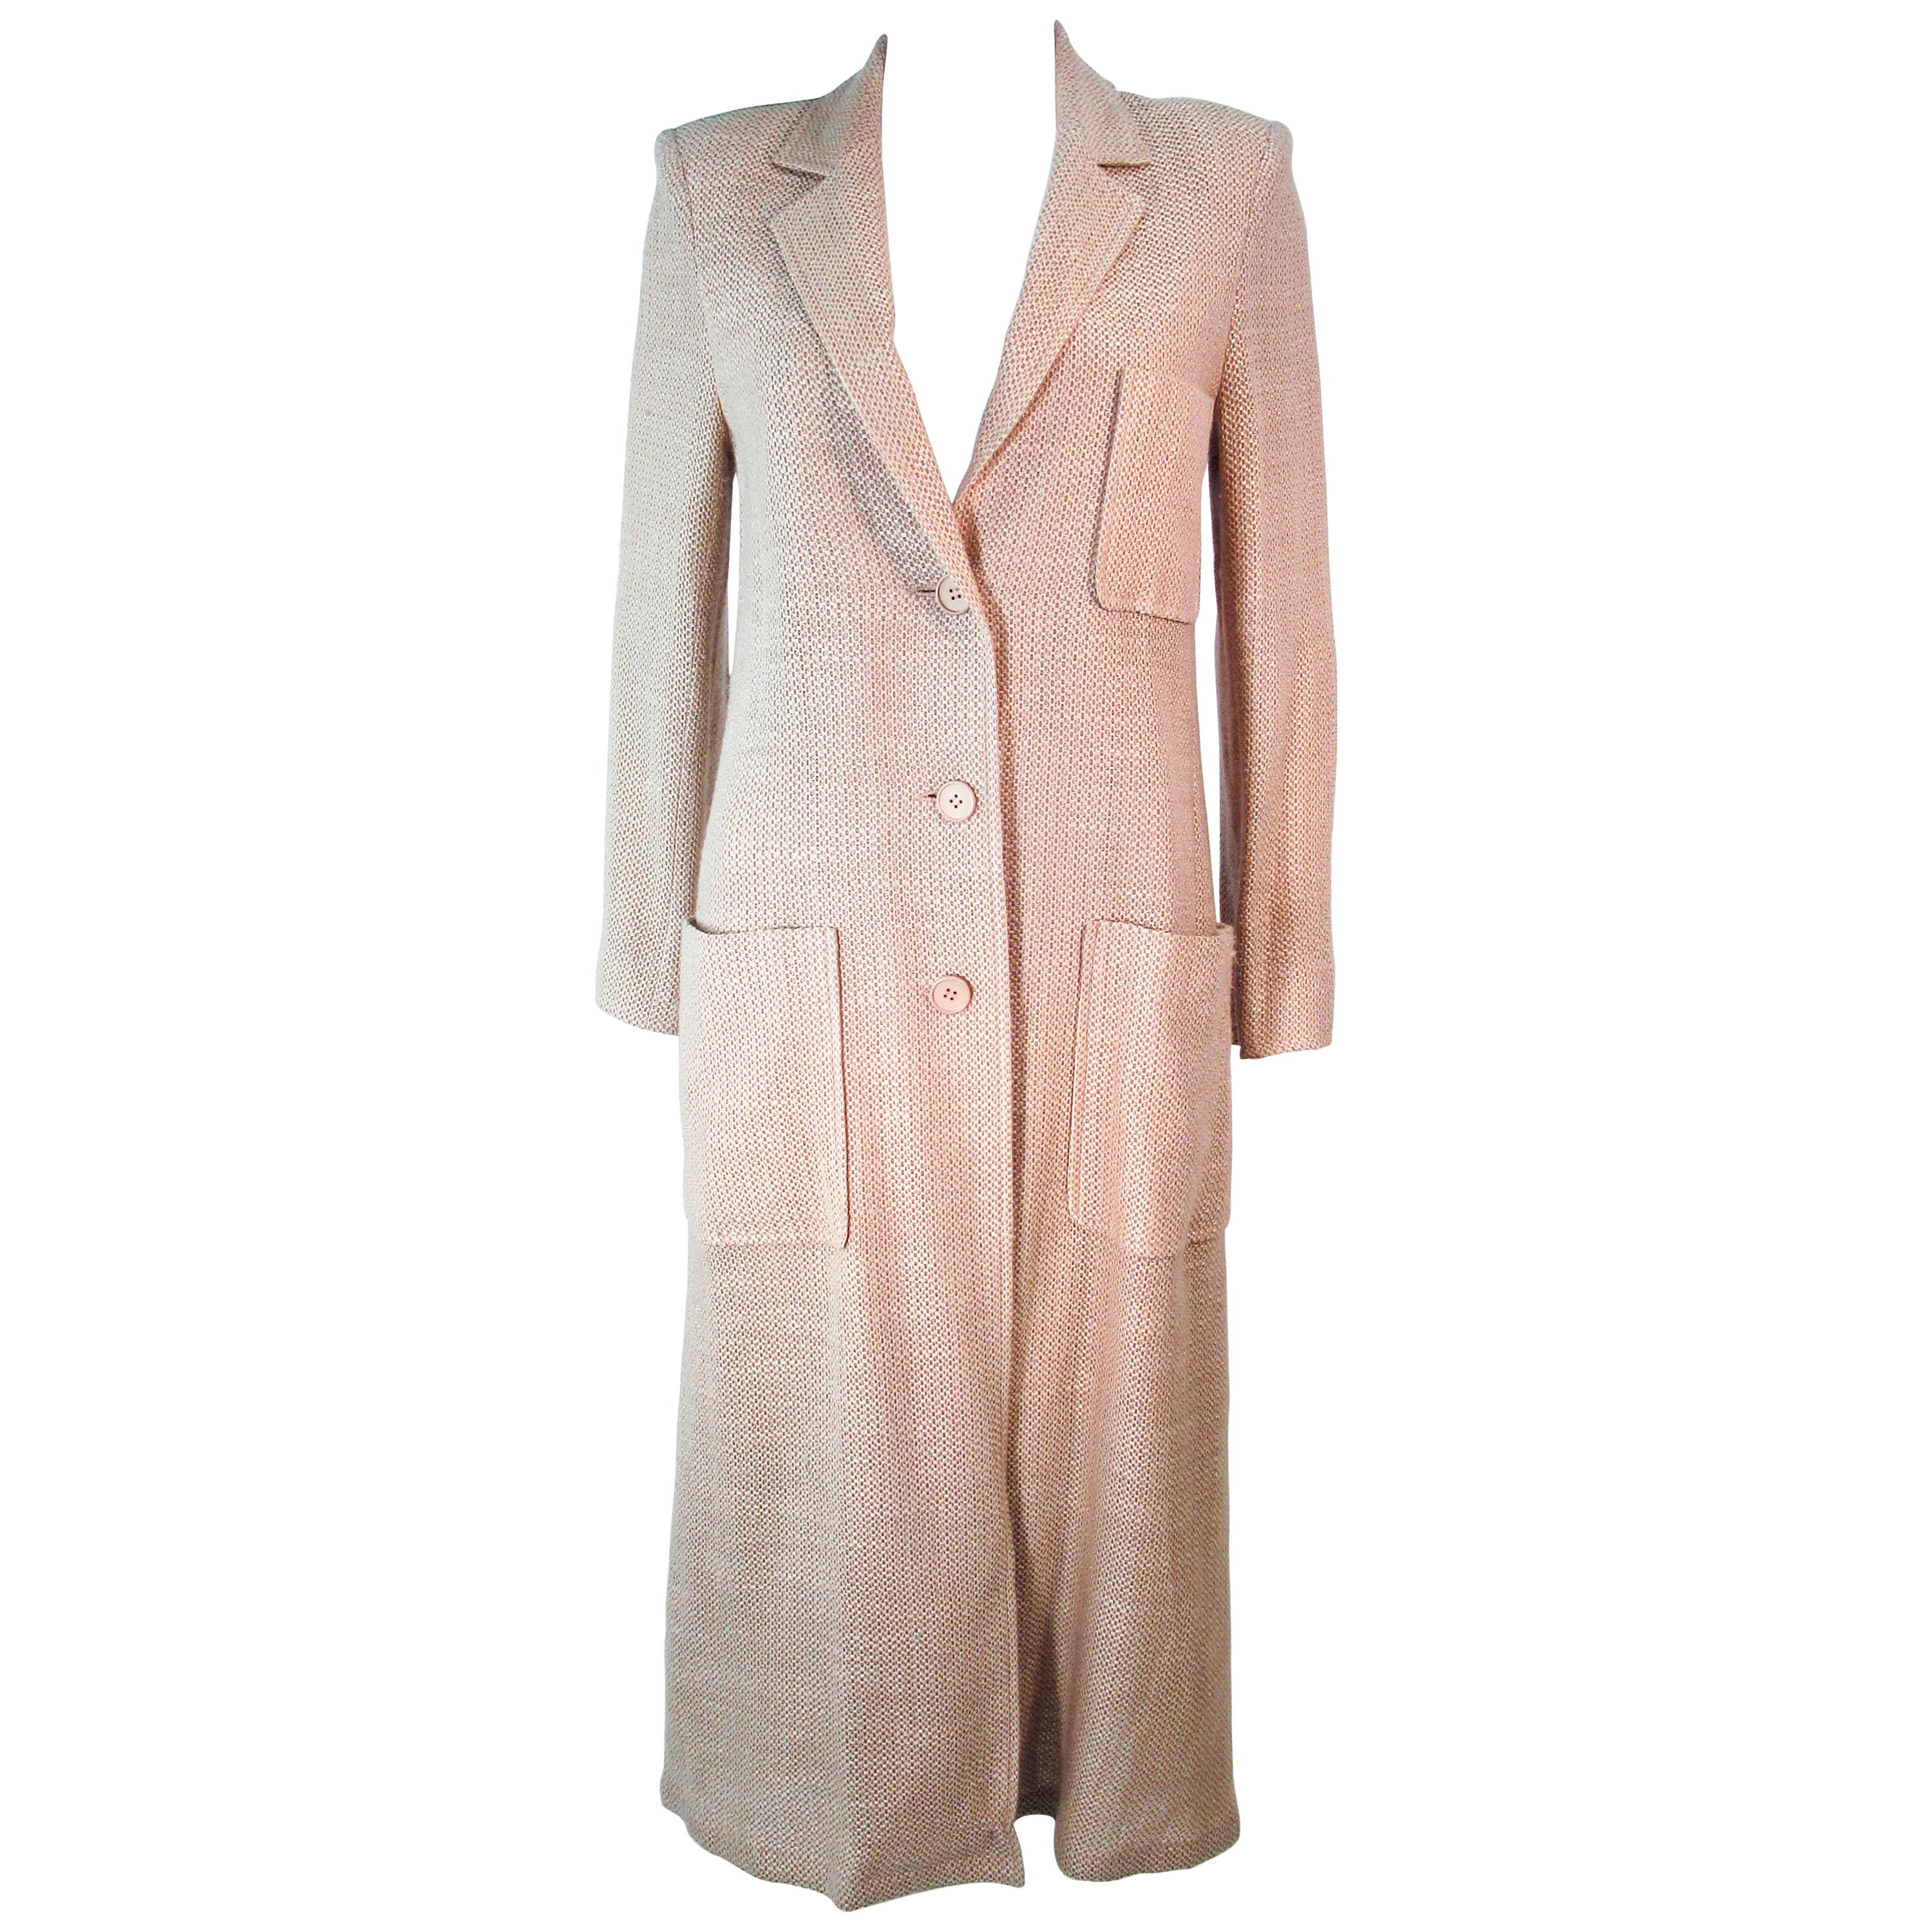 VALENTINO Vintage 1970's Beige and Tan Tweed Long Coat Size 10